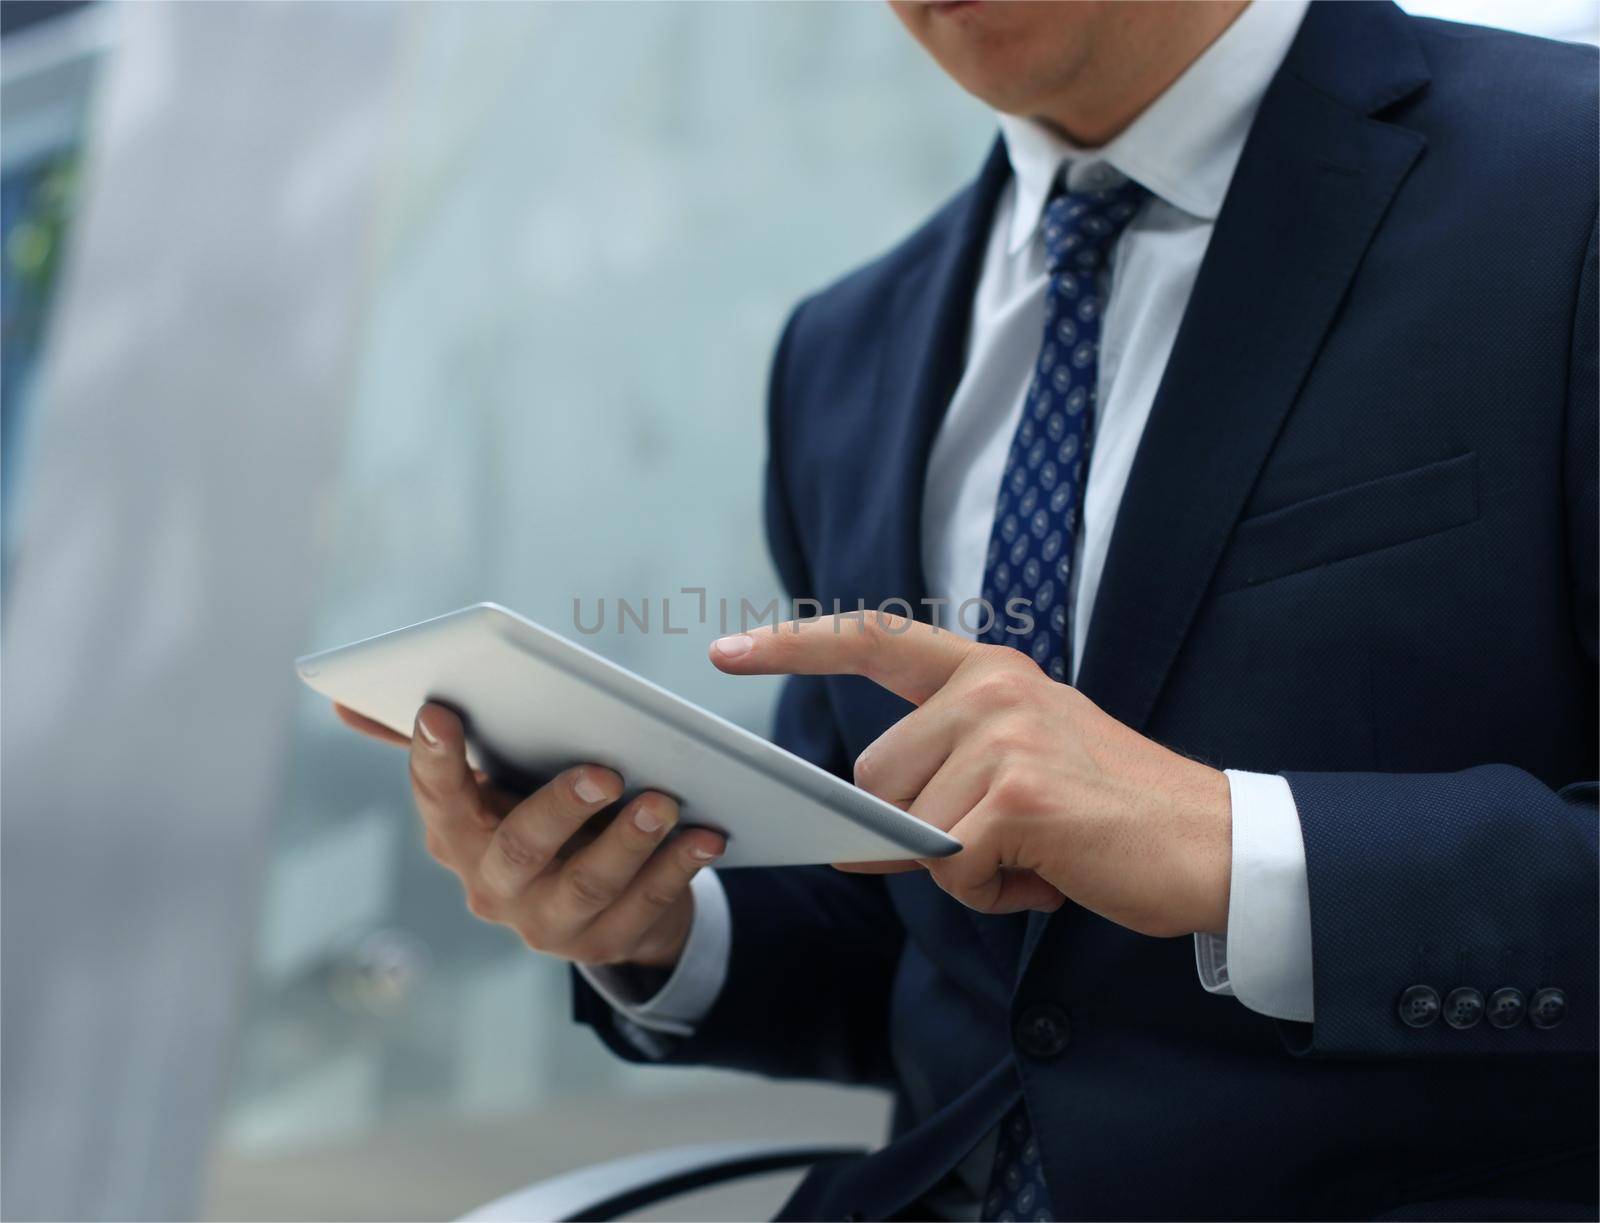 Midsection of businessman using digital tablet in office